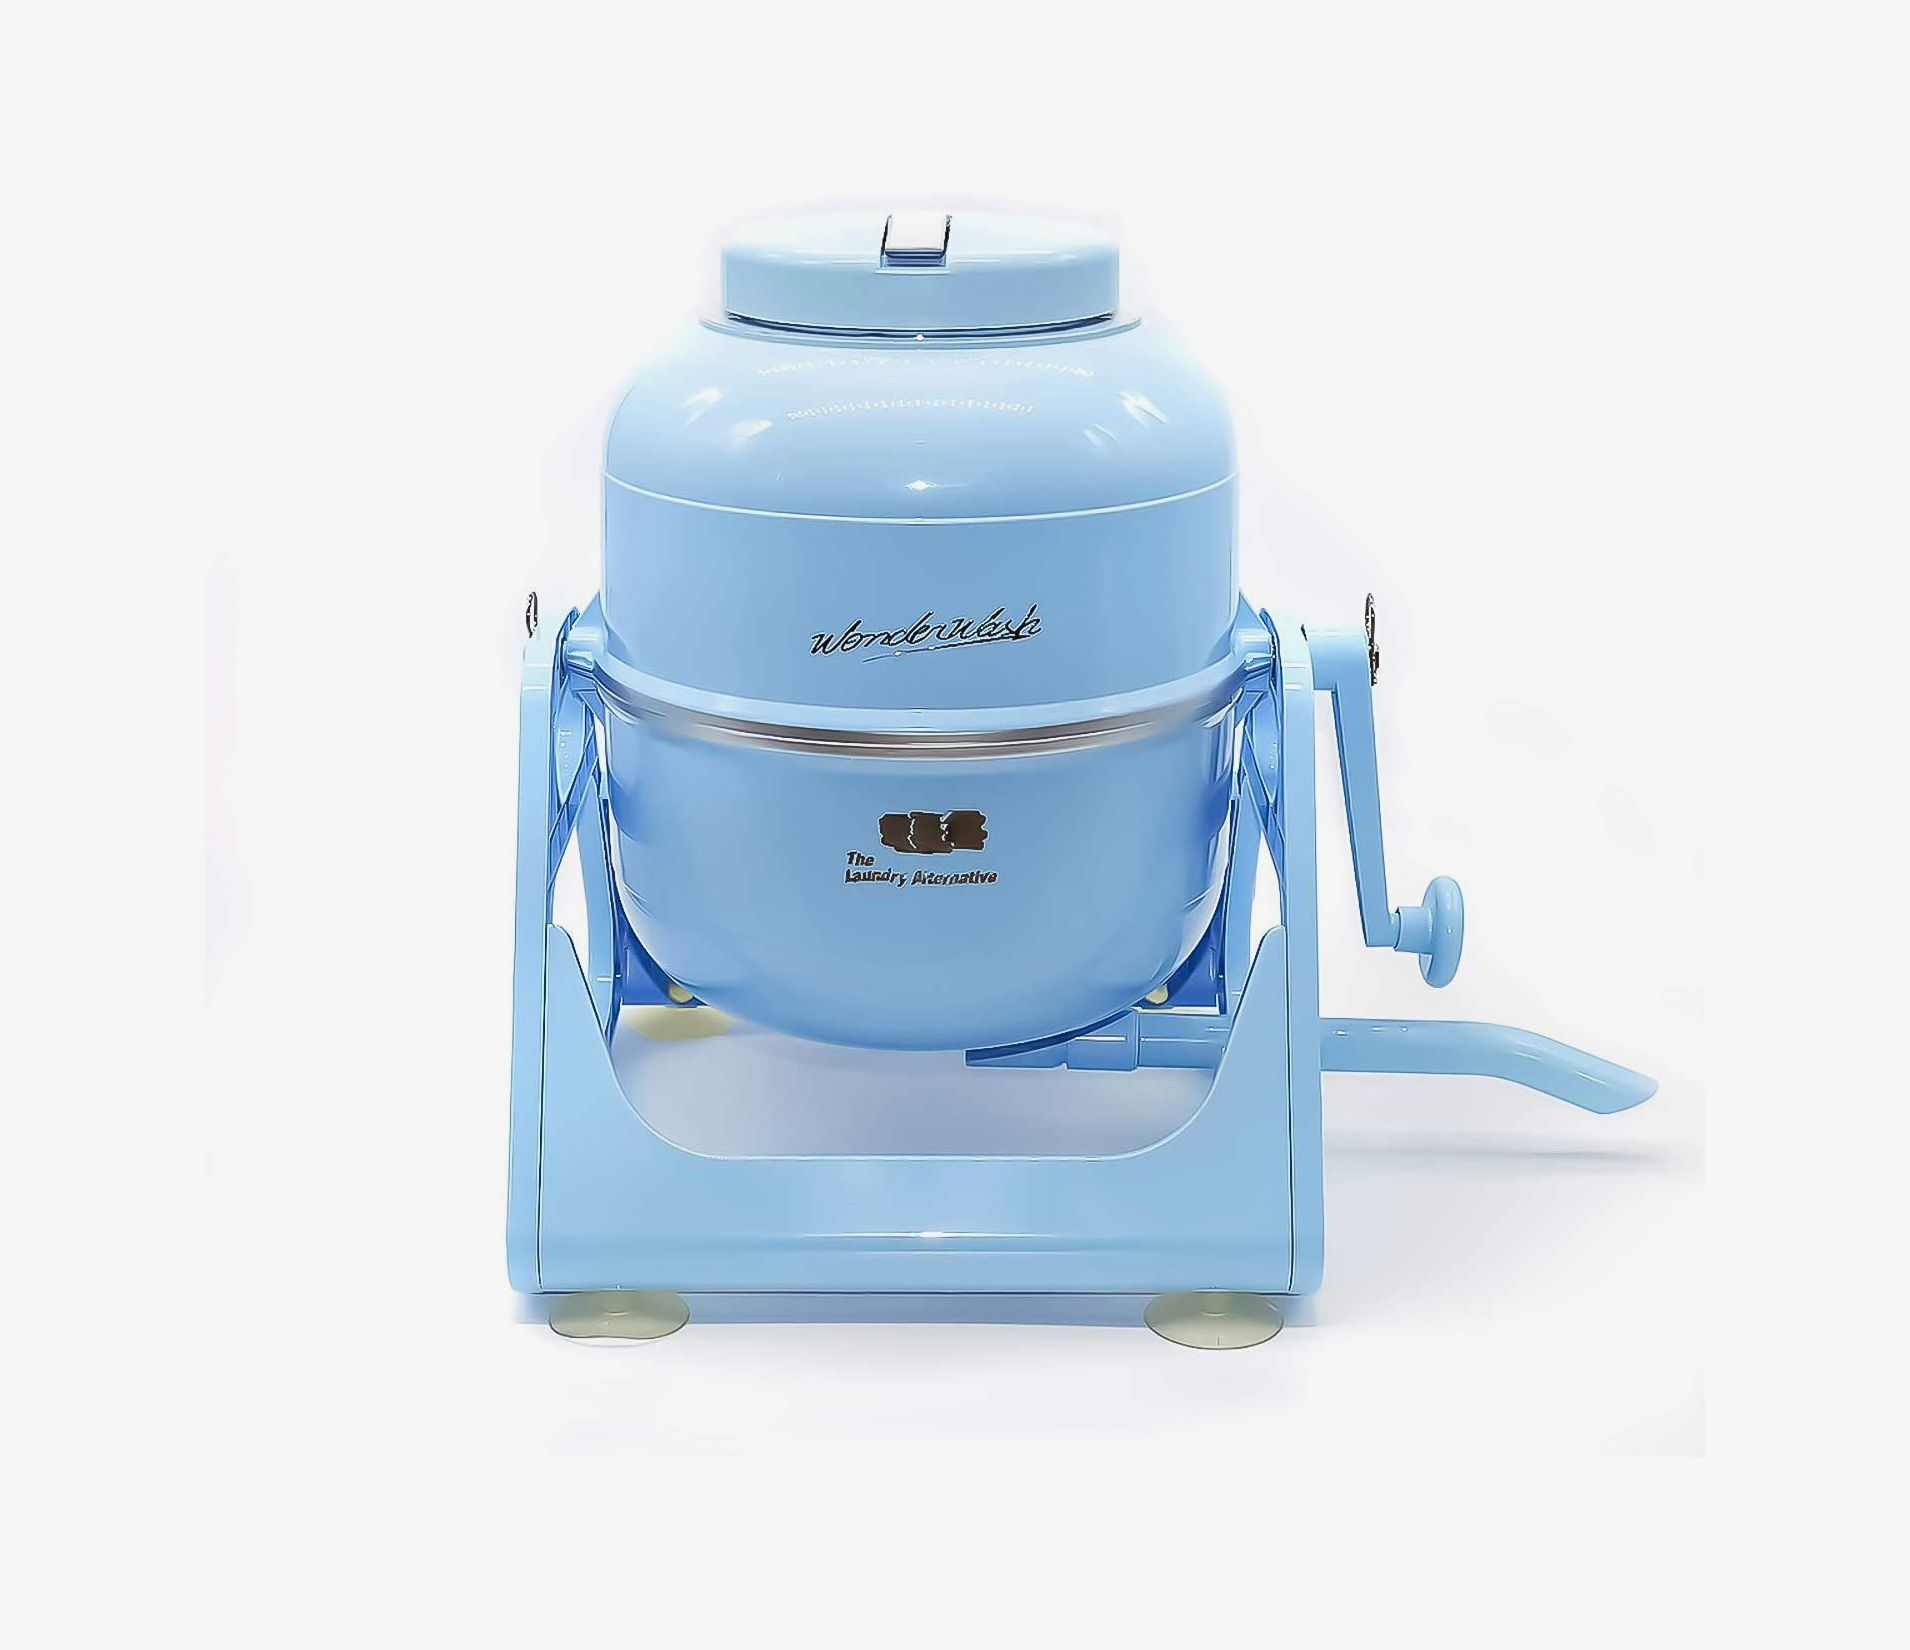 Electric Compact Laundry Machin... Mini Washing Machine with Spin Dryer 